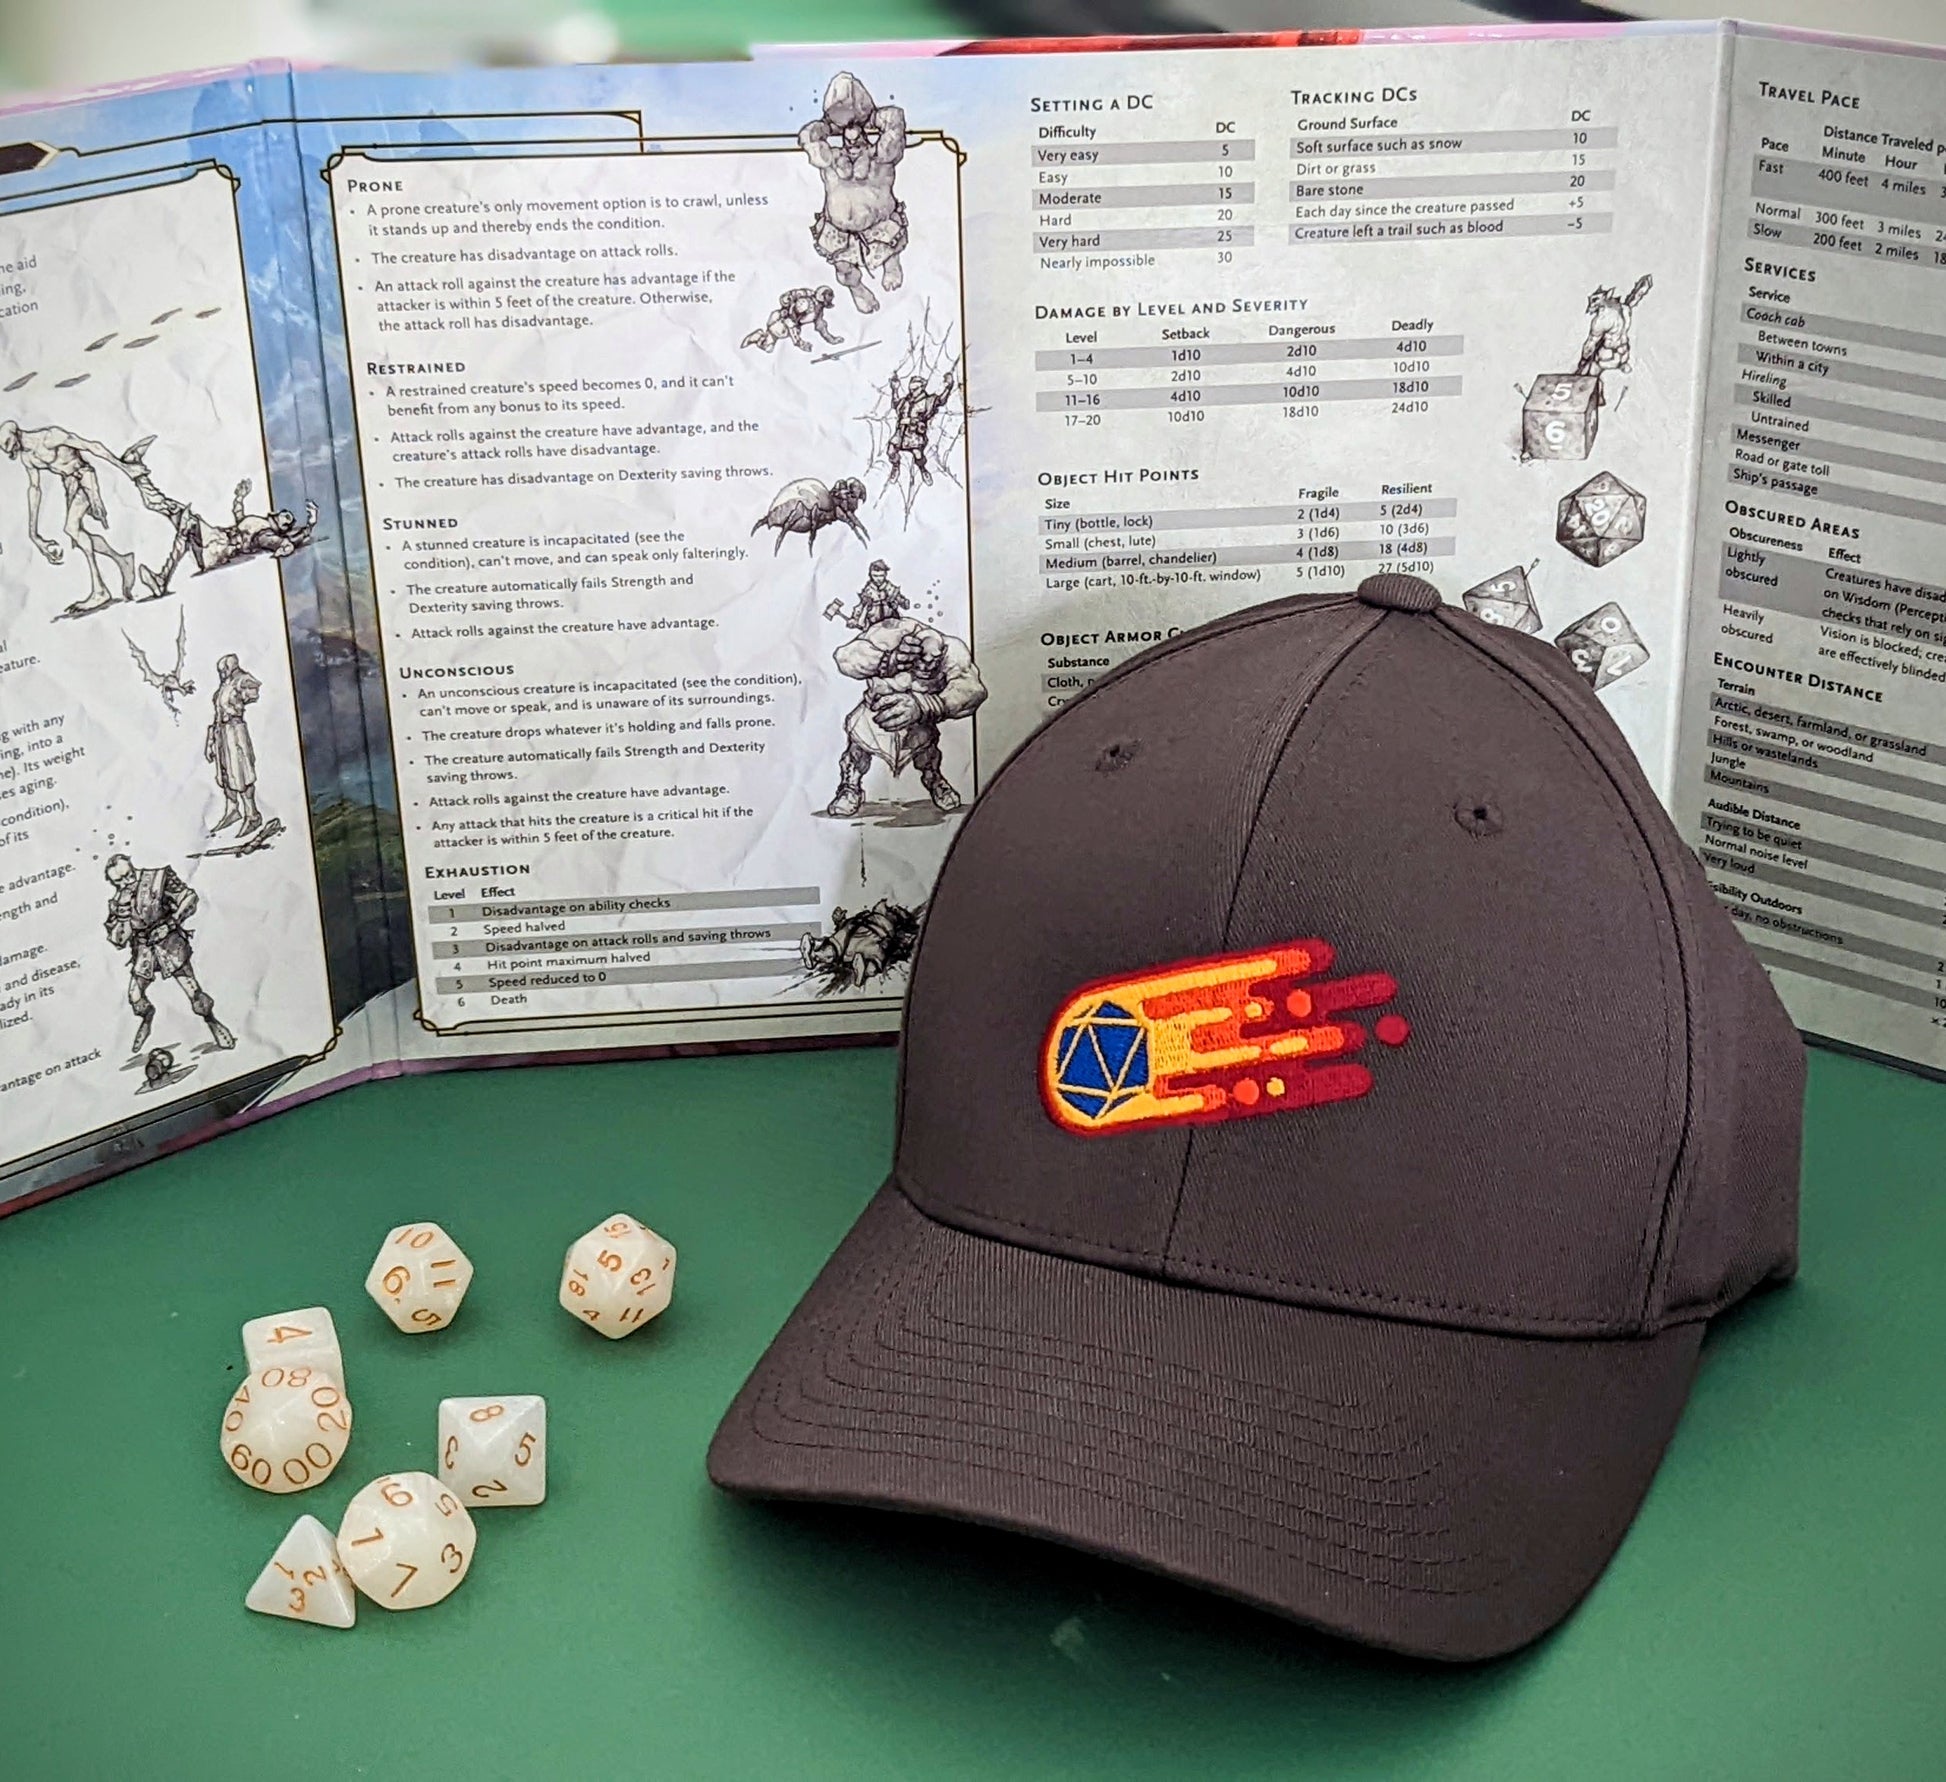 Grey D20 flaming comet baseball hat in front of dungeons and dragons DM screen